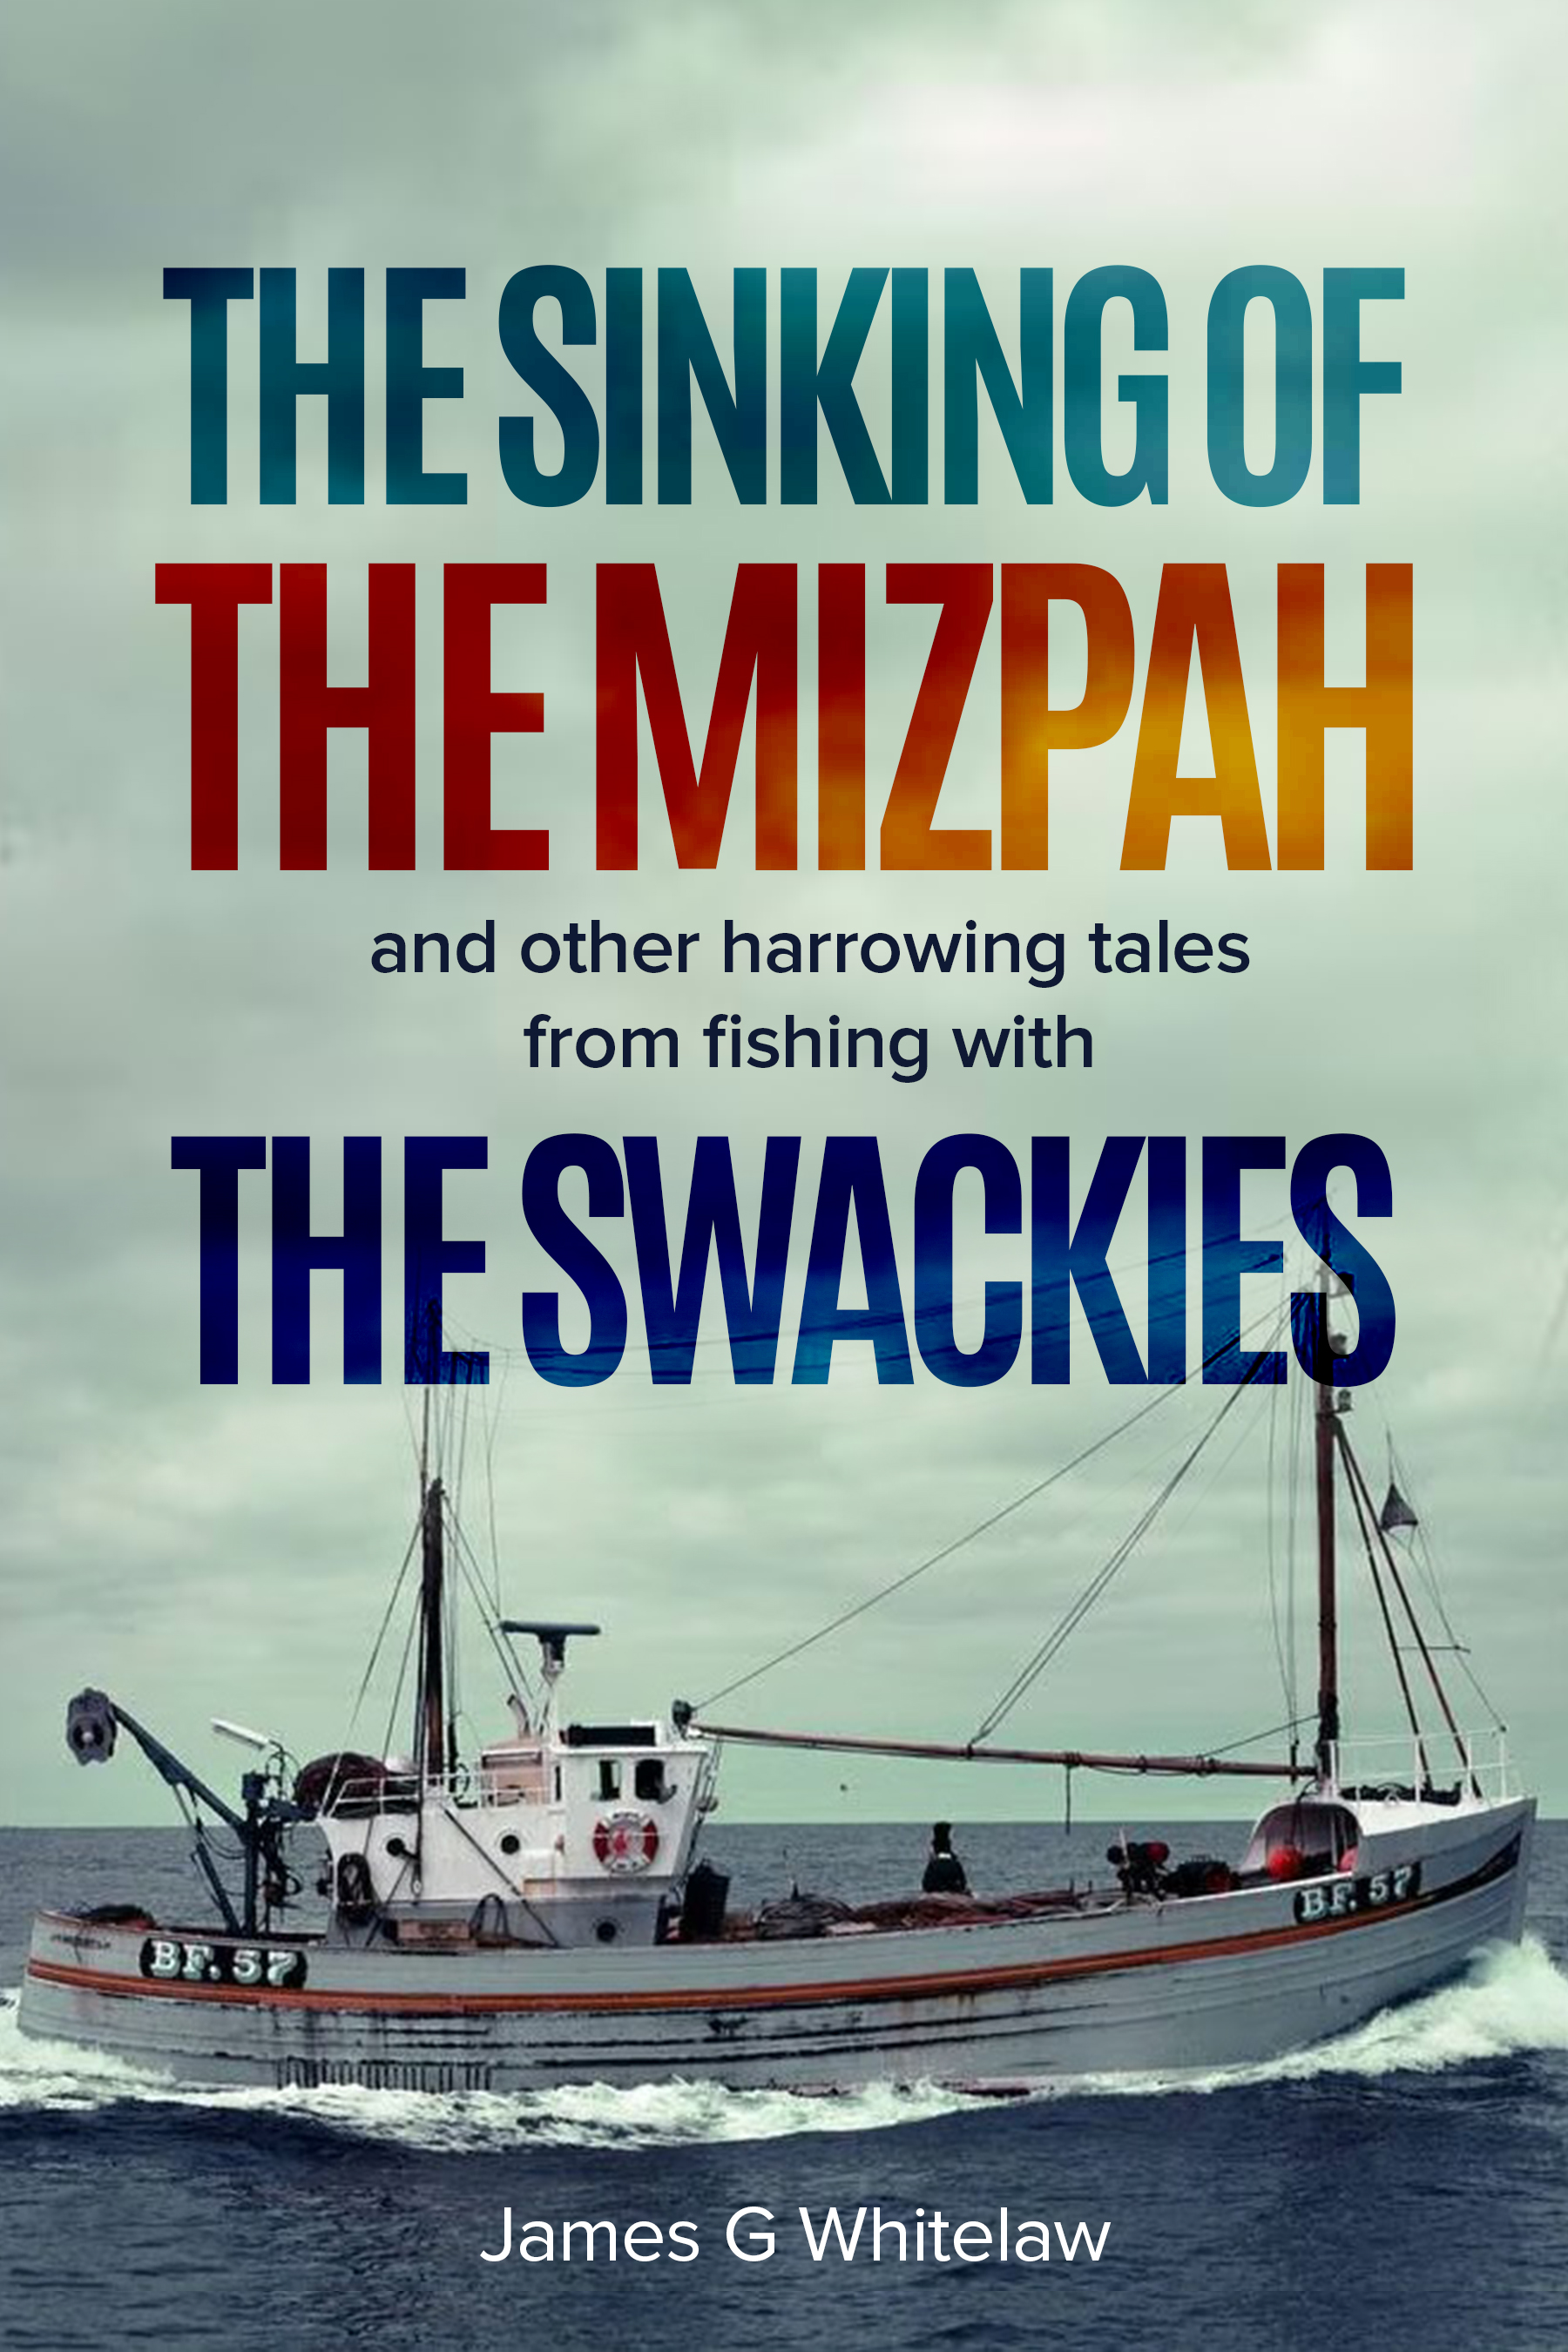 The Sinking of the Mizpah and other harrowing tales from fishing with the Swackies